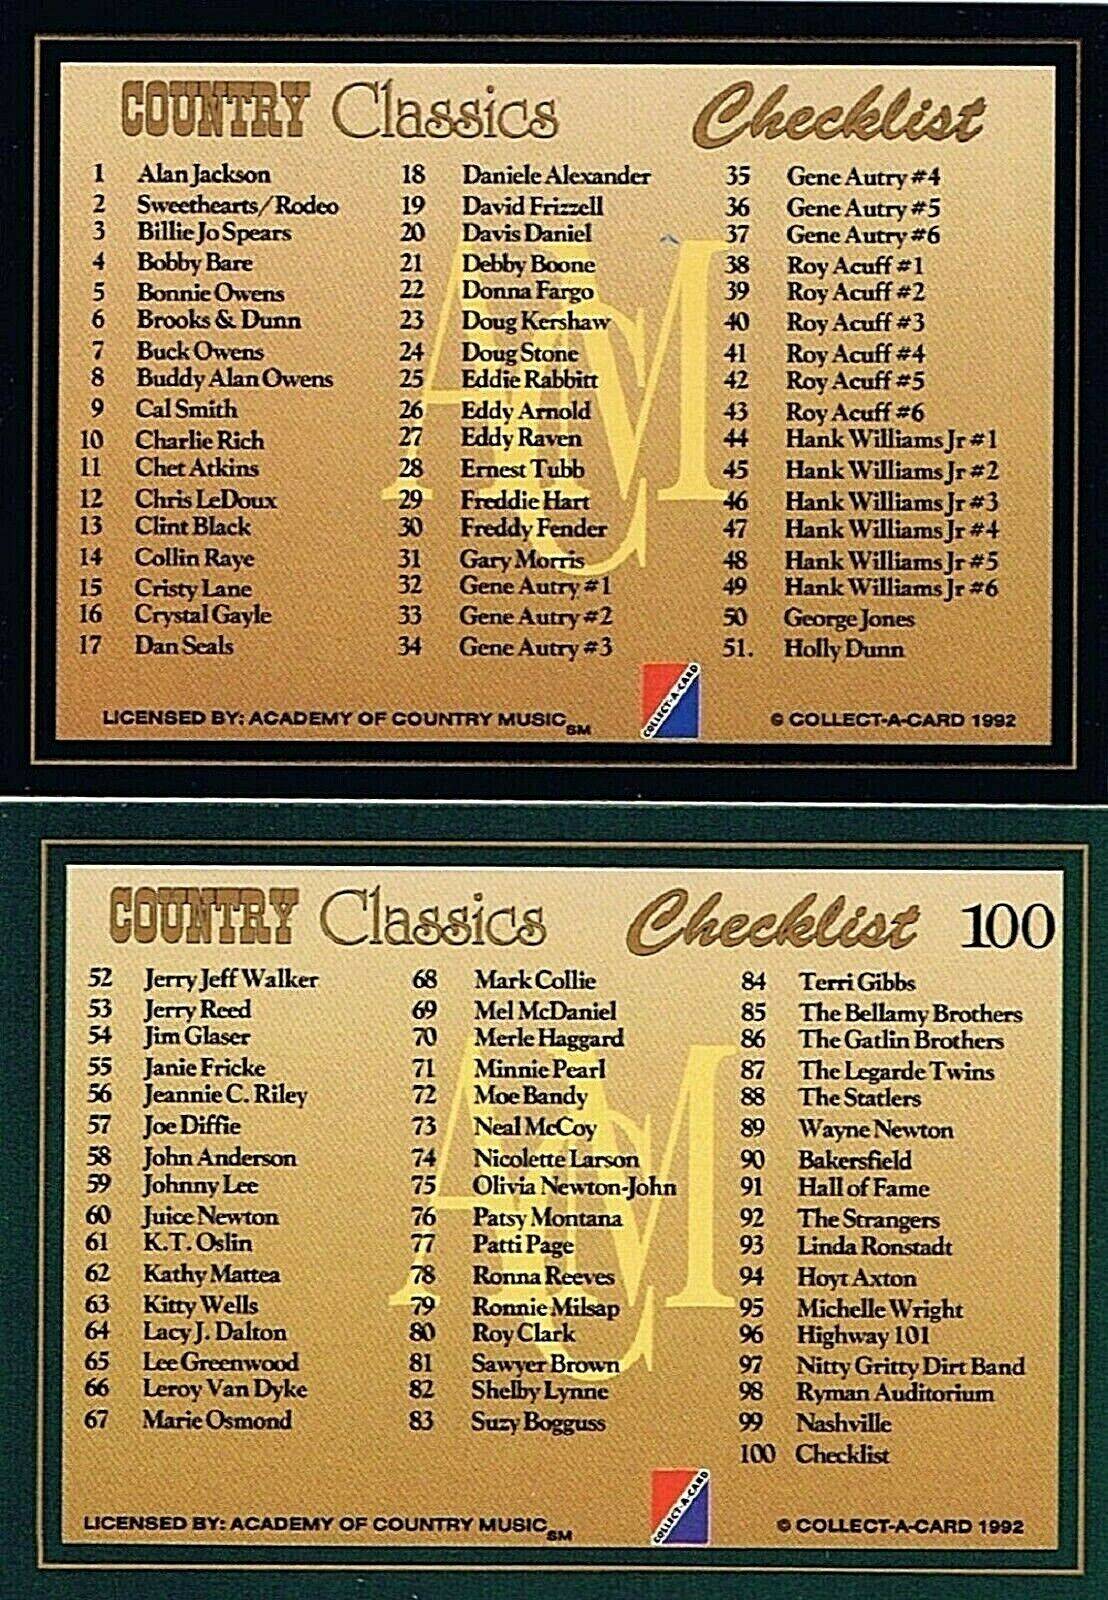 Country Classics Singles (1992 Collect-A-Card)